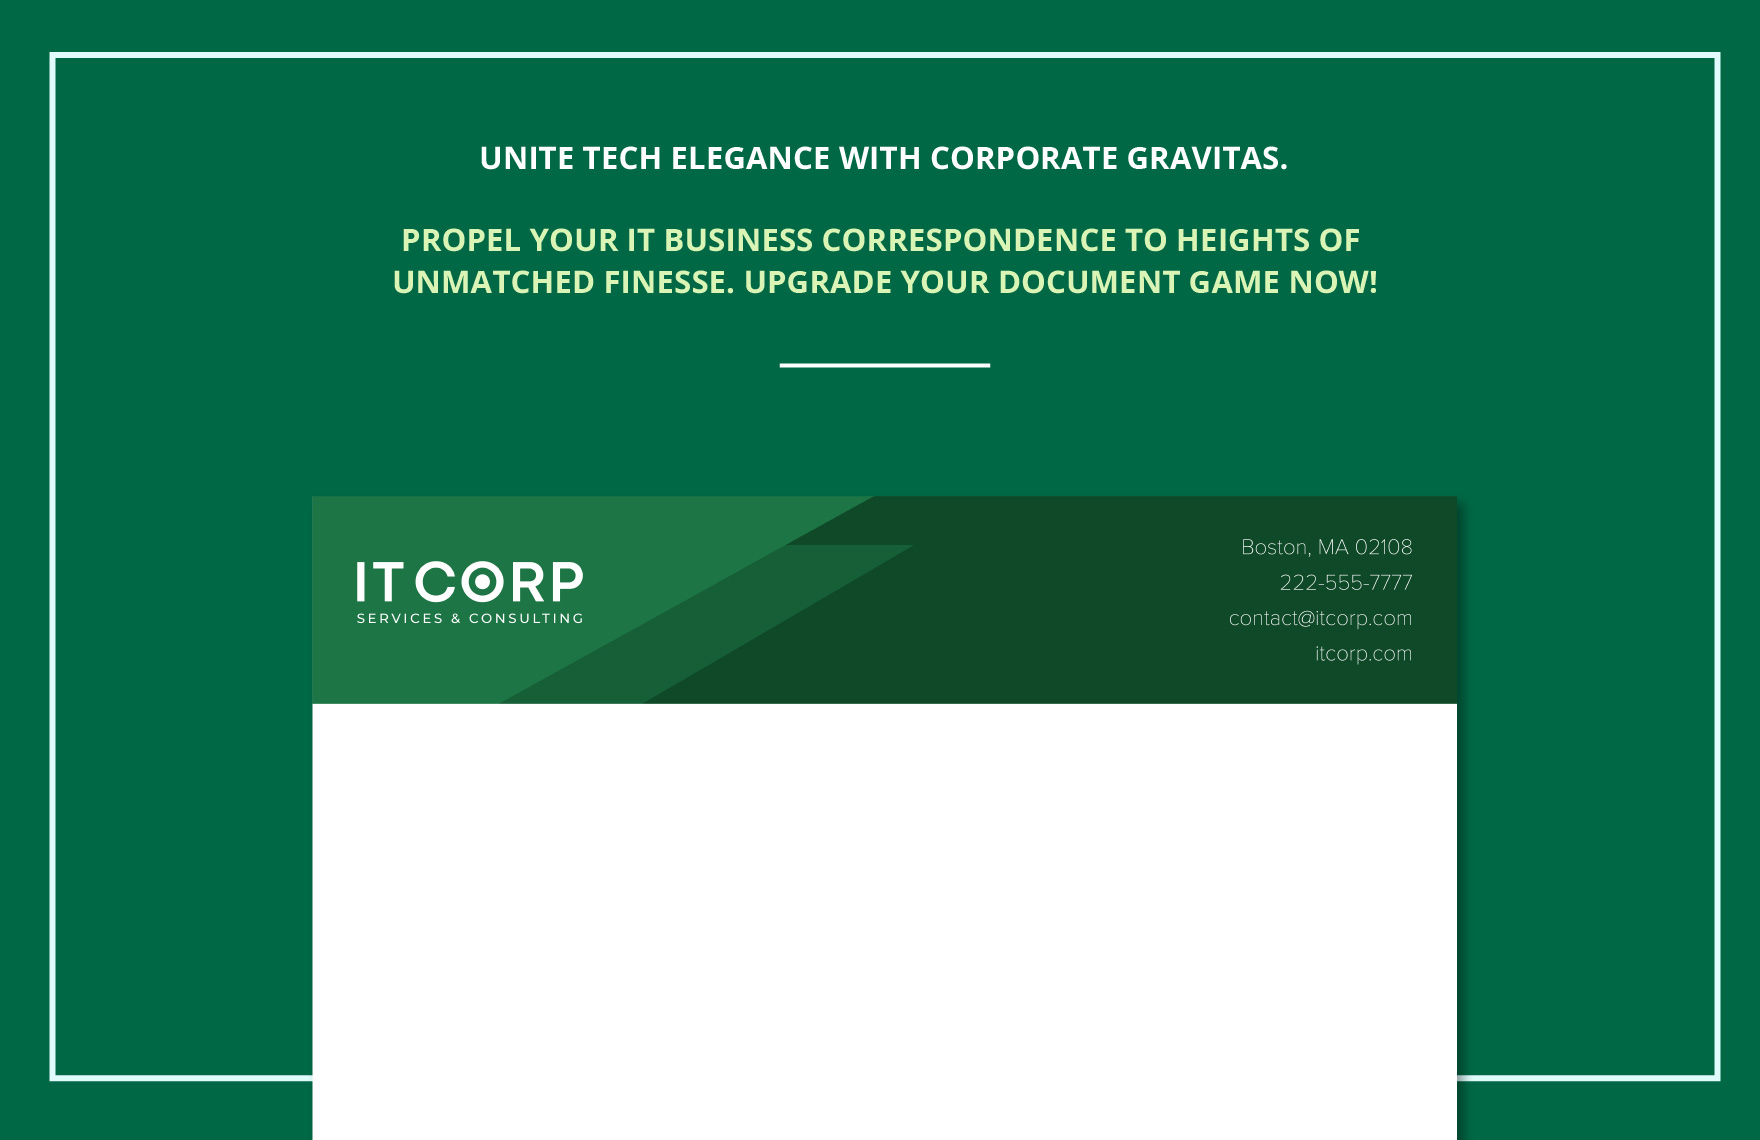 IT Business Intelligence & Analytics Consulting Letterhead Template